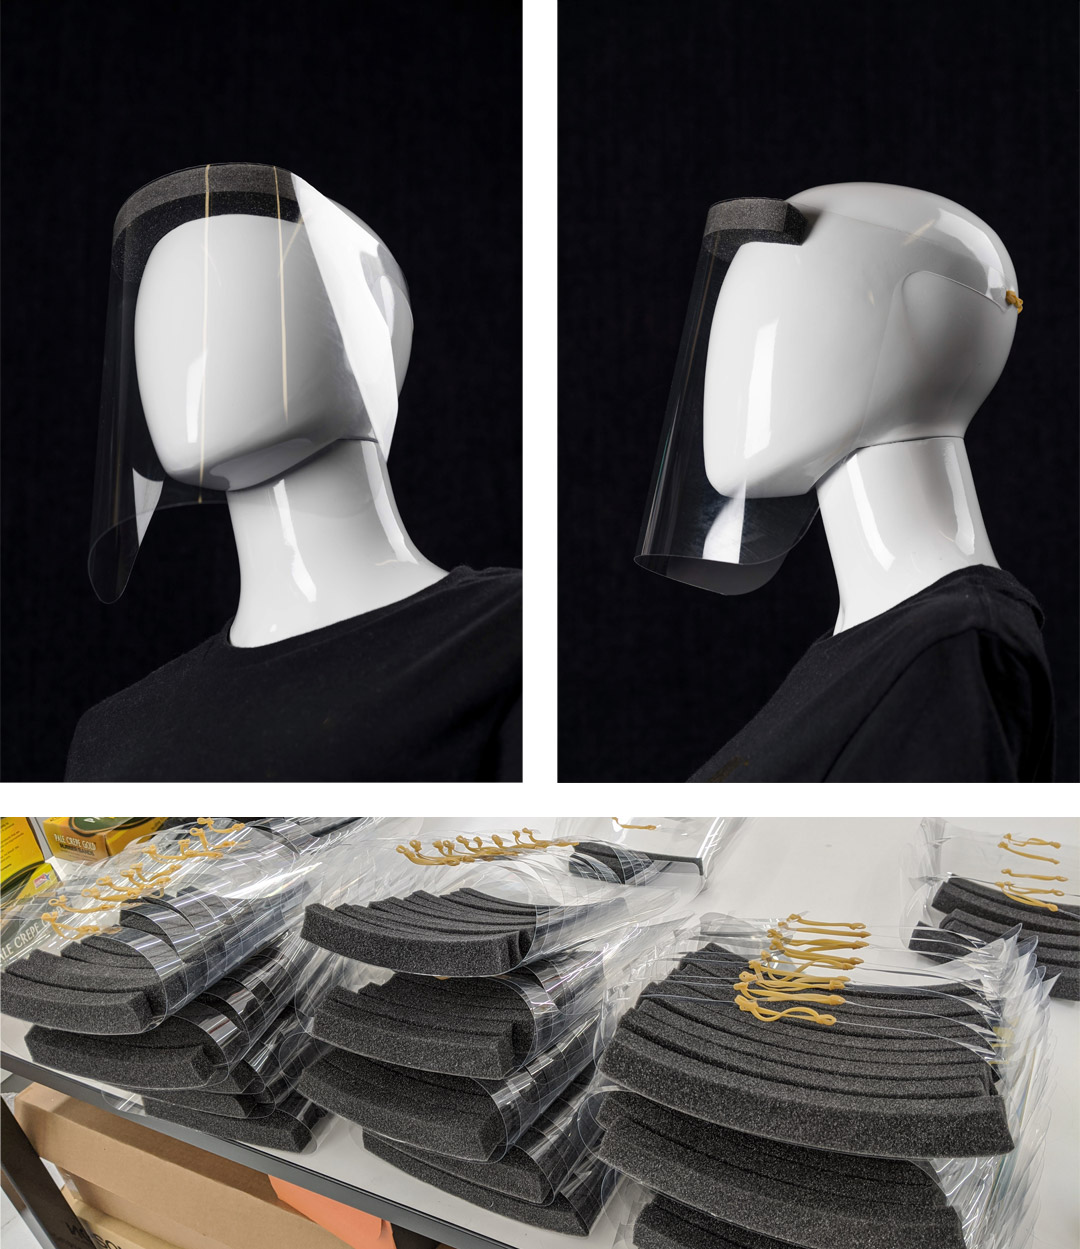 Mannequin front and side view with stacks of completed face shields